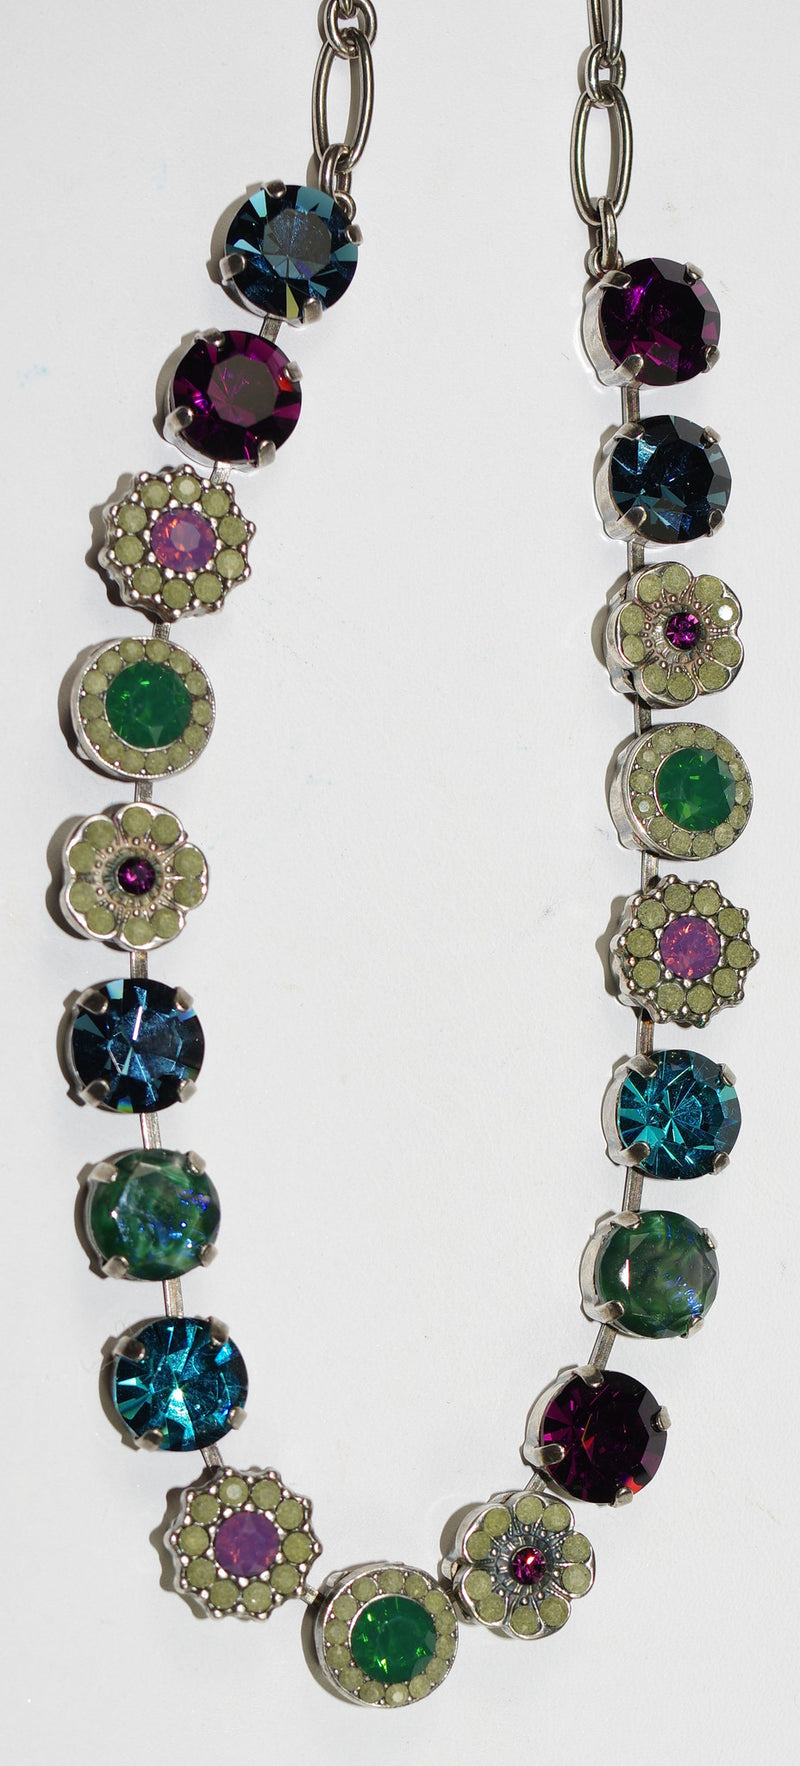 MARIANA NECKLACE PATIENCE SOPHIA: purple, blue, green stones in silver setting, 17" adjustable chain